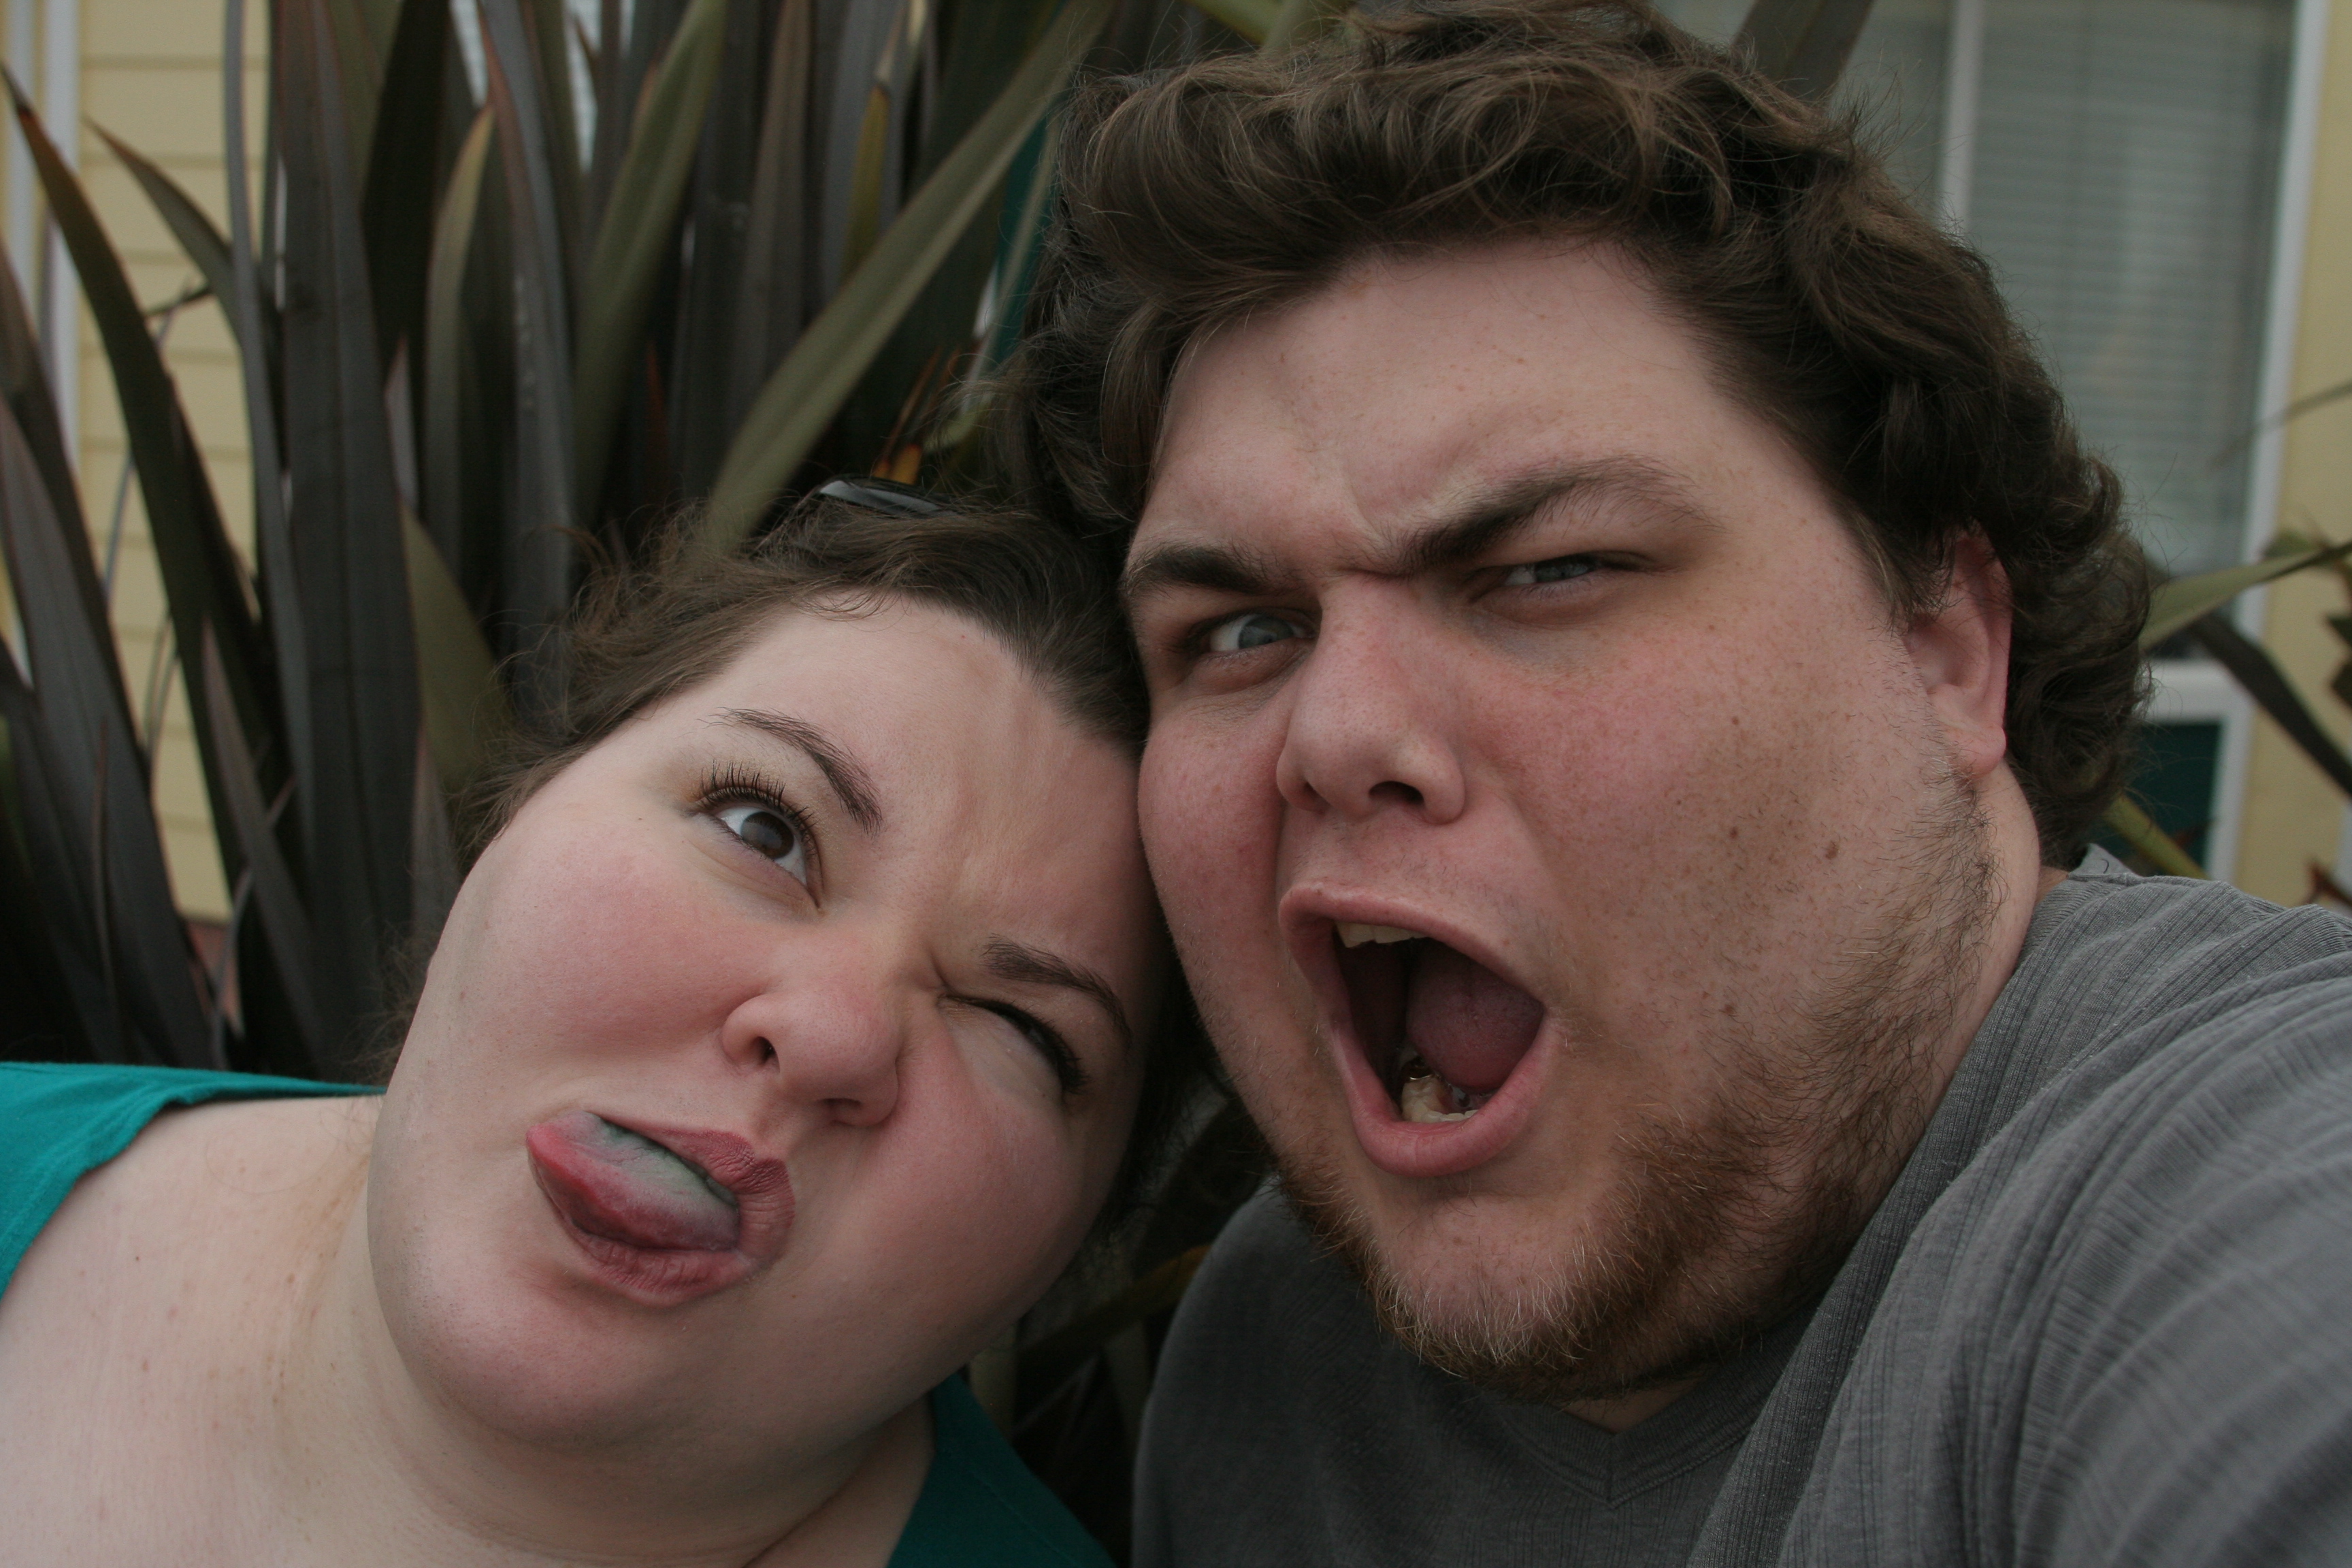 Bonnie and Daniel from 2009. Bonnie is sticking her blue-stained tongue out, and Daniel is making a contorted face with mouth agape.